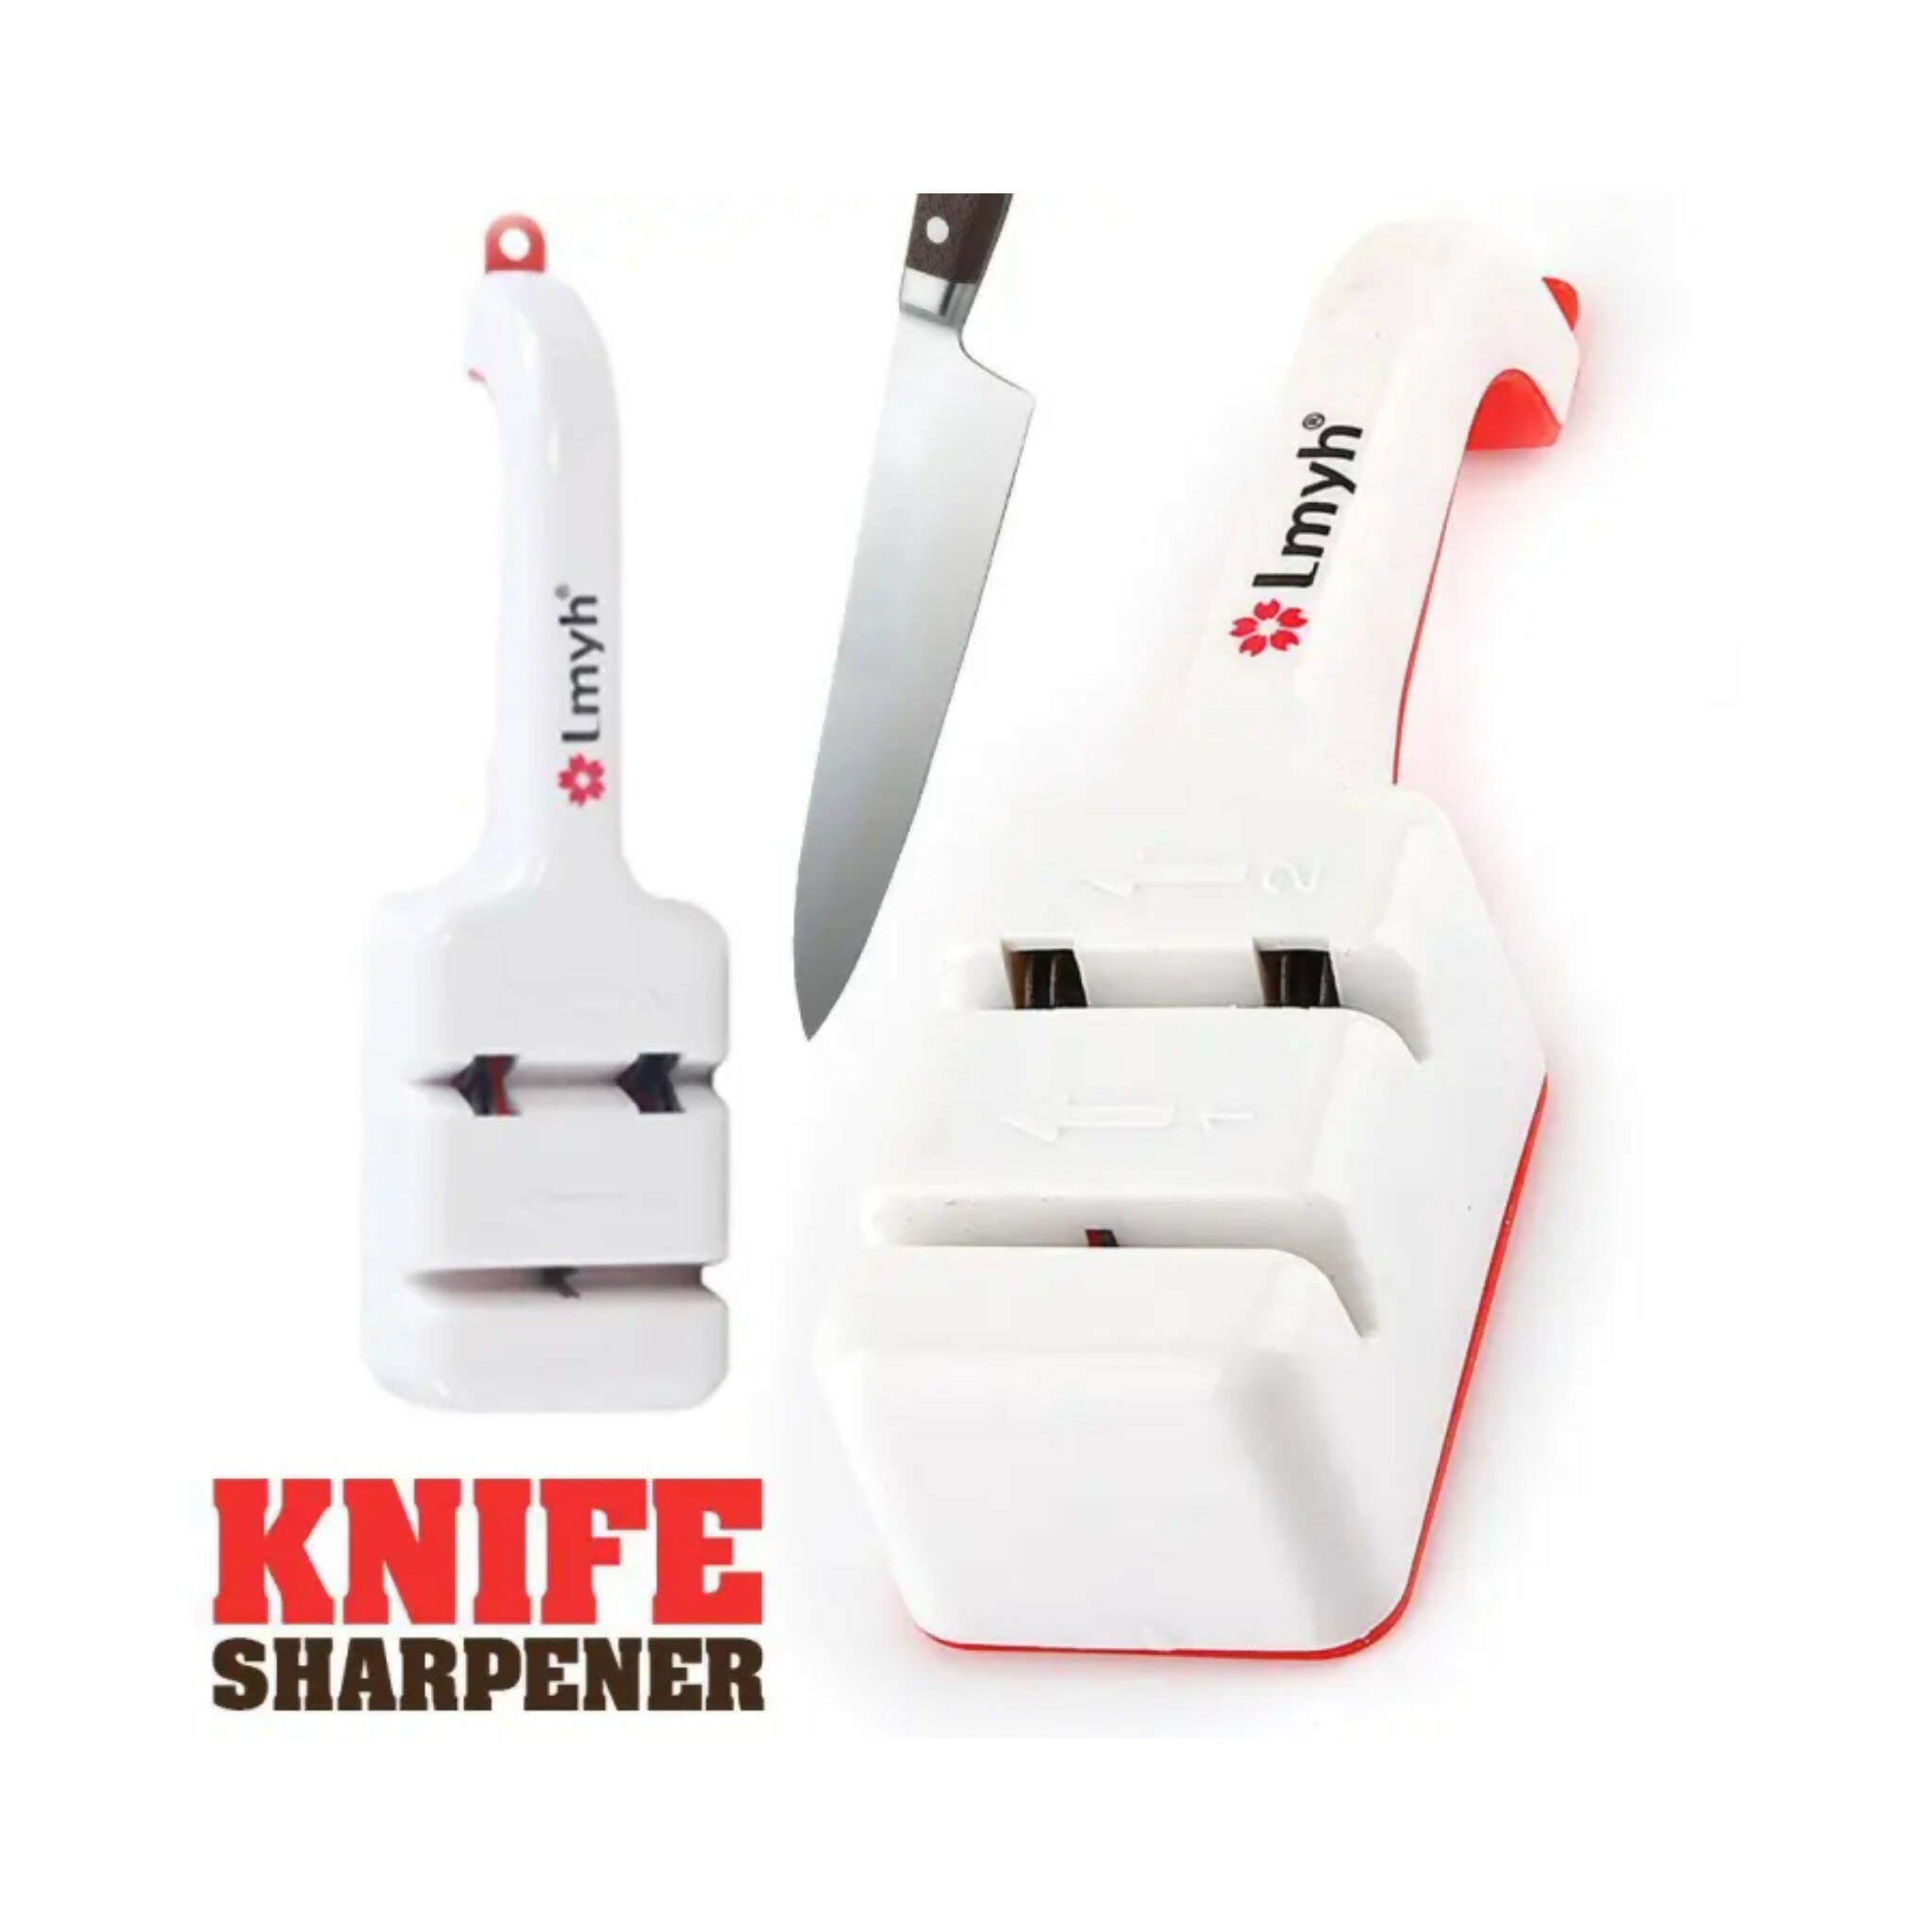 Knife Sharpener, LMYH Best DIY Tool, for Perfectly Sharp Knives